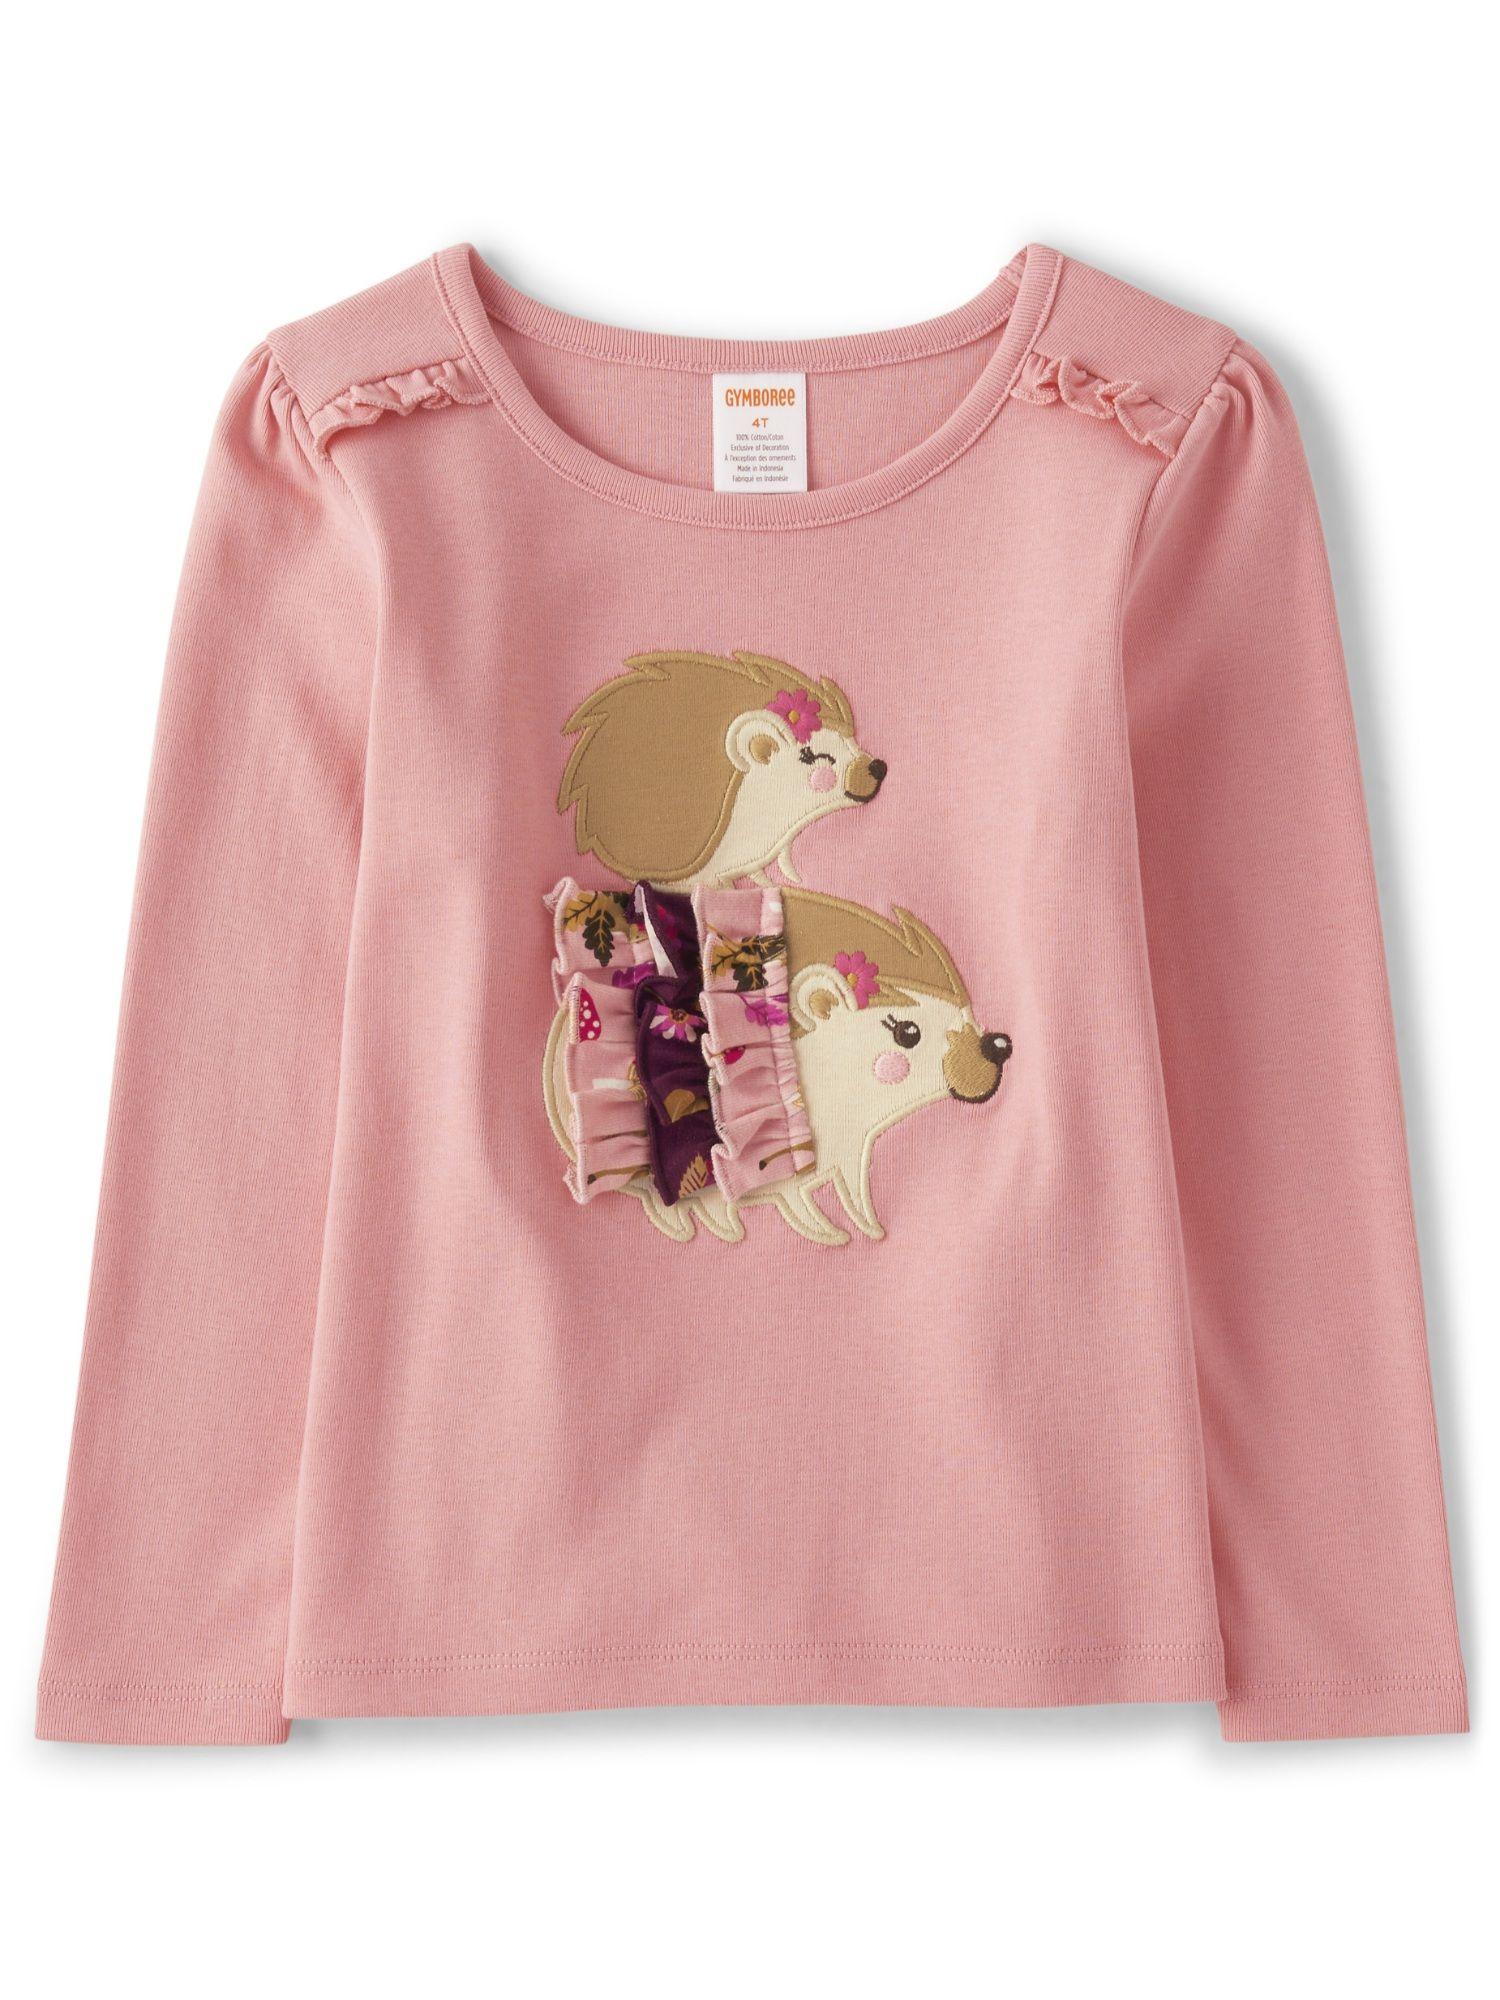 girls light pink ruffle embroidered tops (12-18 months)